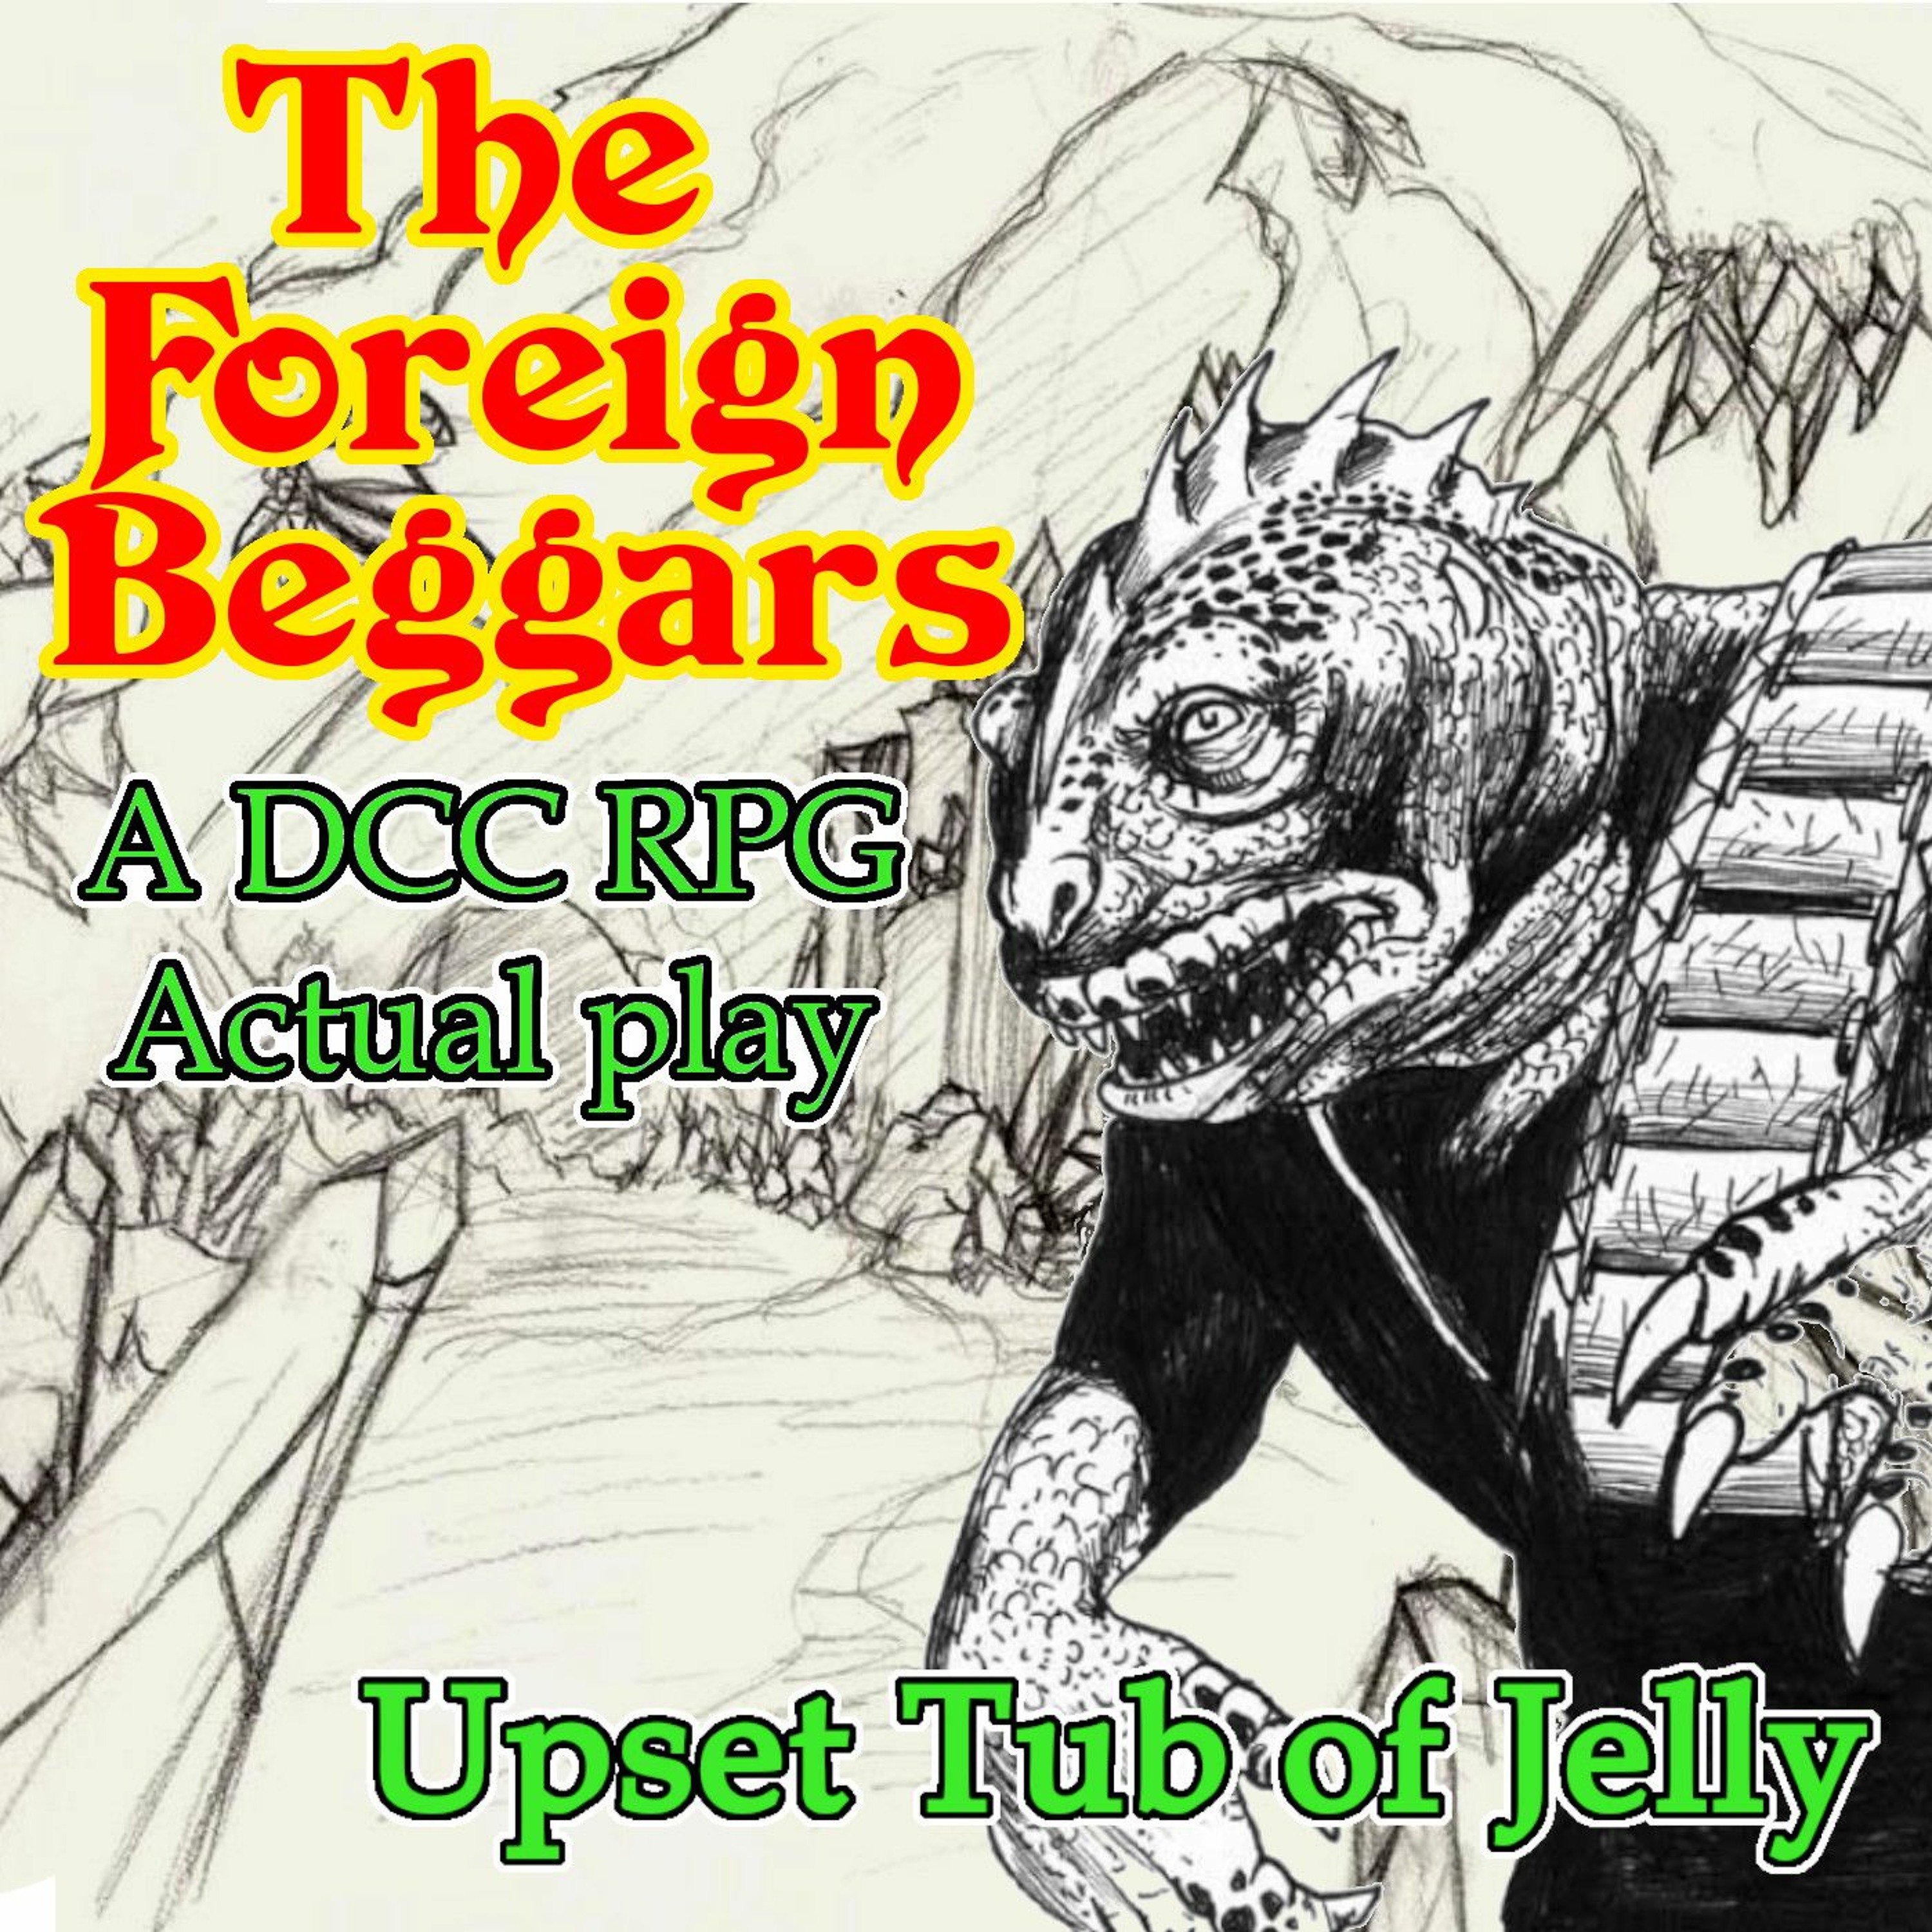 The Foreign Beggars 09 [Finale] - Upset Tub Of Jelly (DCC RPG Actual Play)